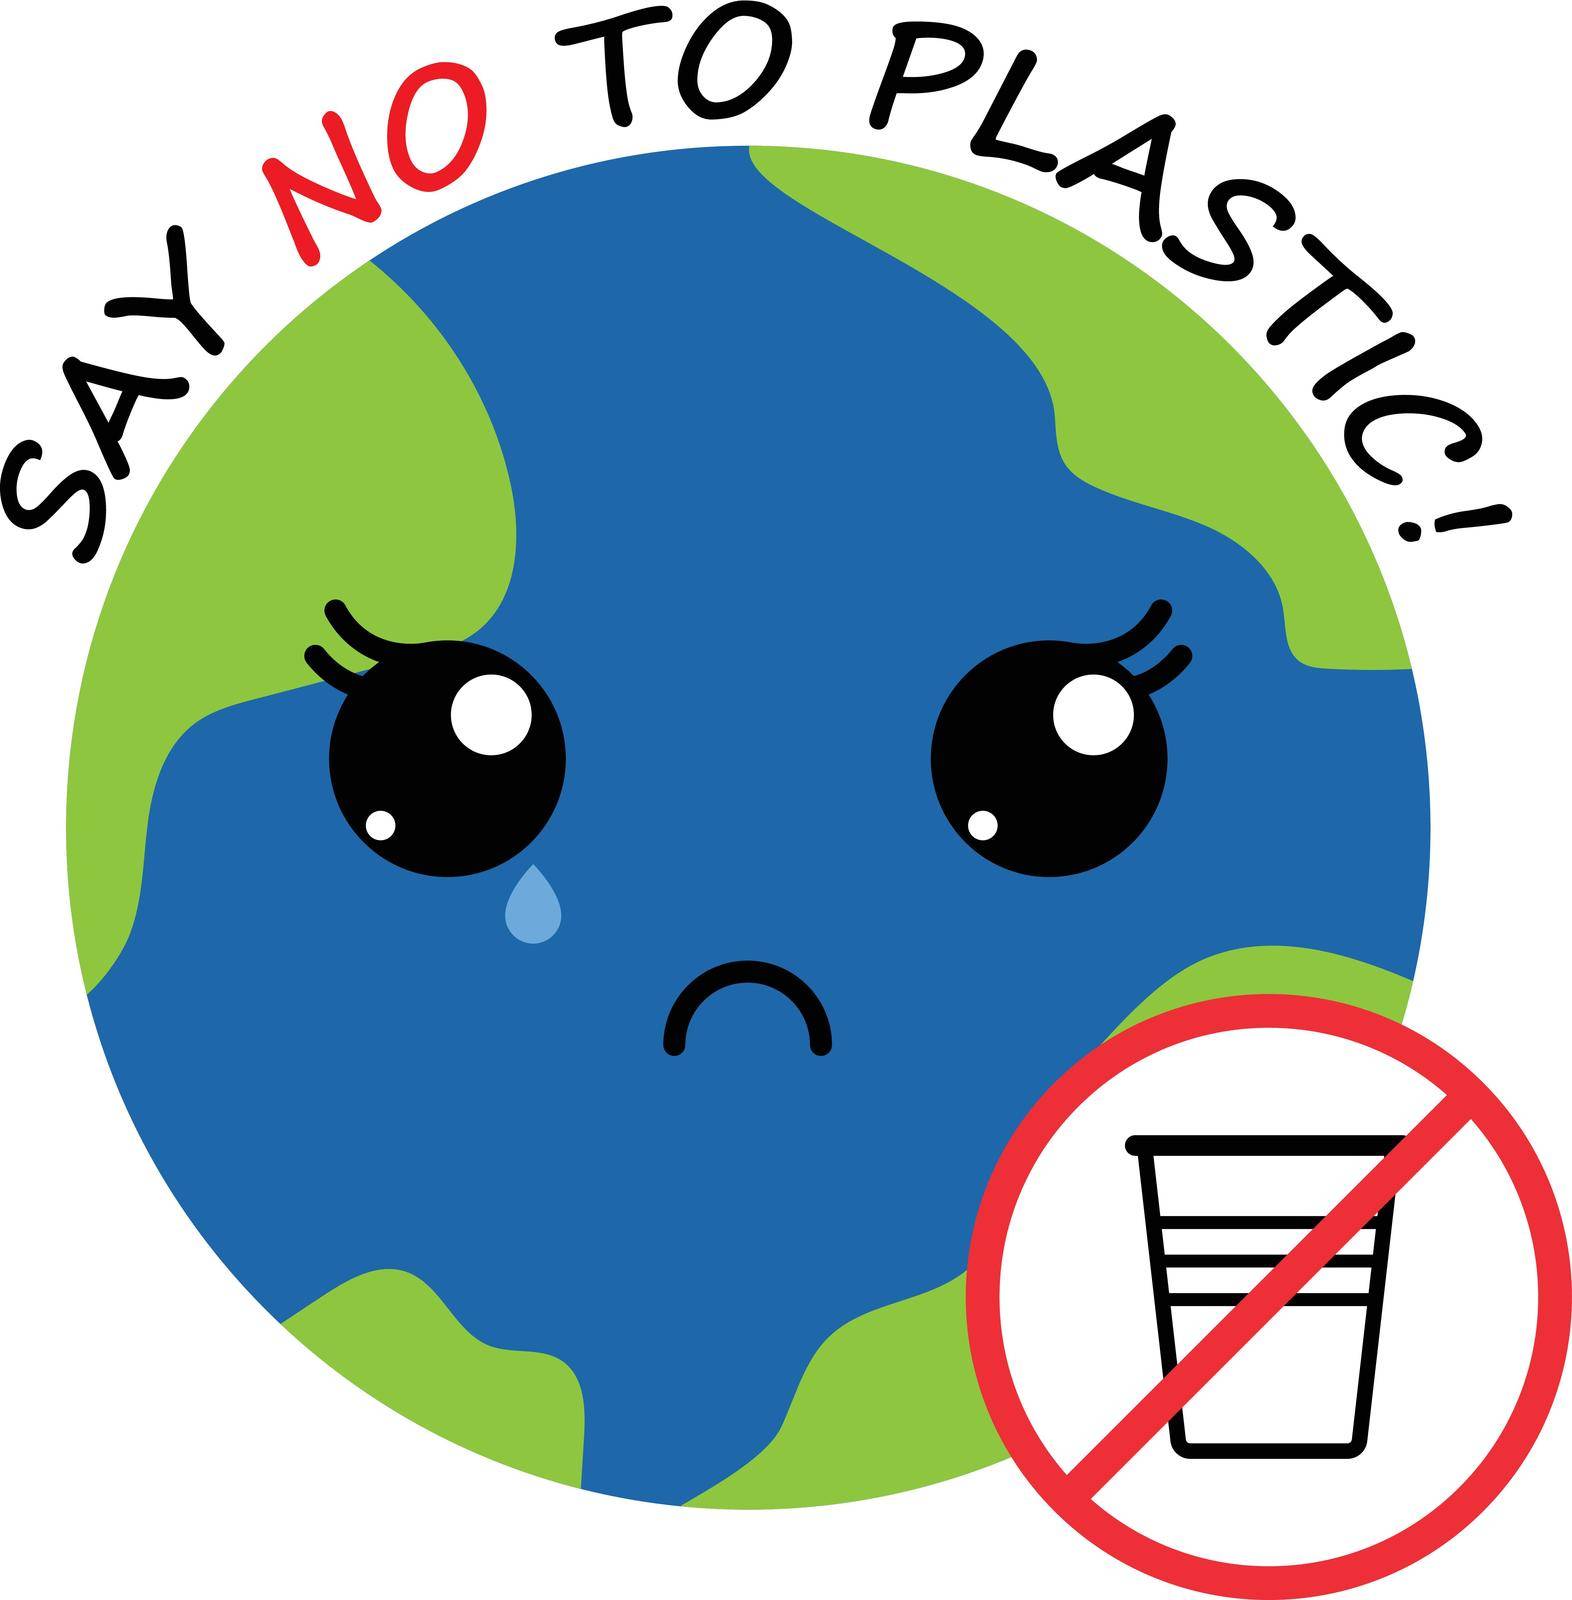 crying planet earth with cute kawaii black eyes, plastic glass red prohibition sign and lettering. say no to plastic. save environment ecology of earth. go green eco friendly environment concept.